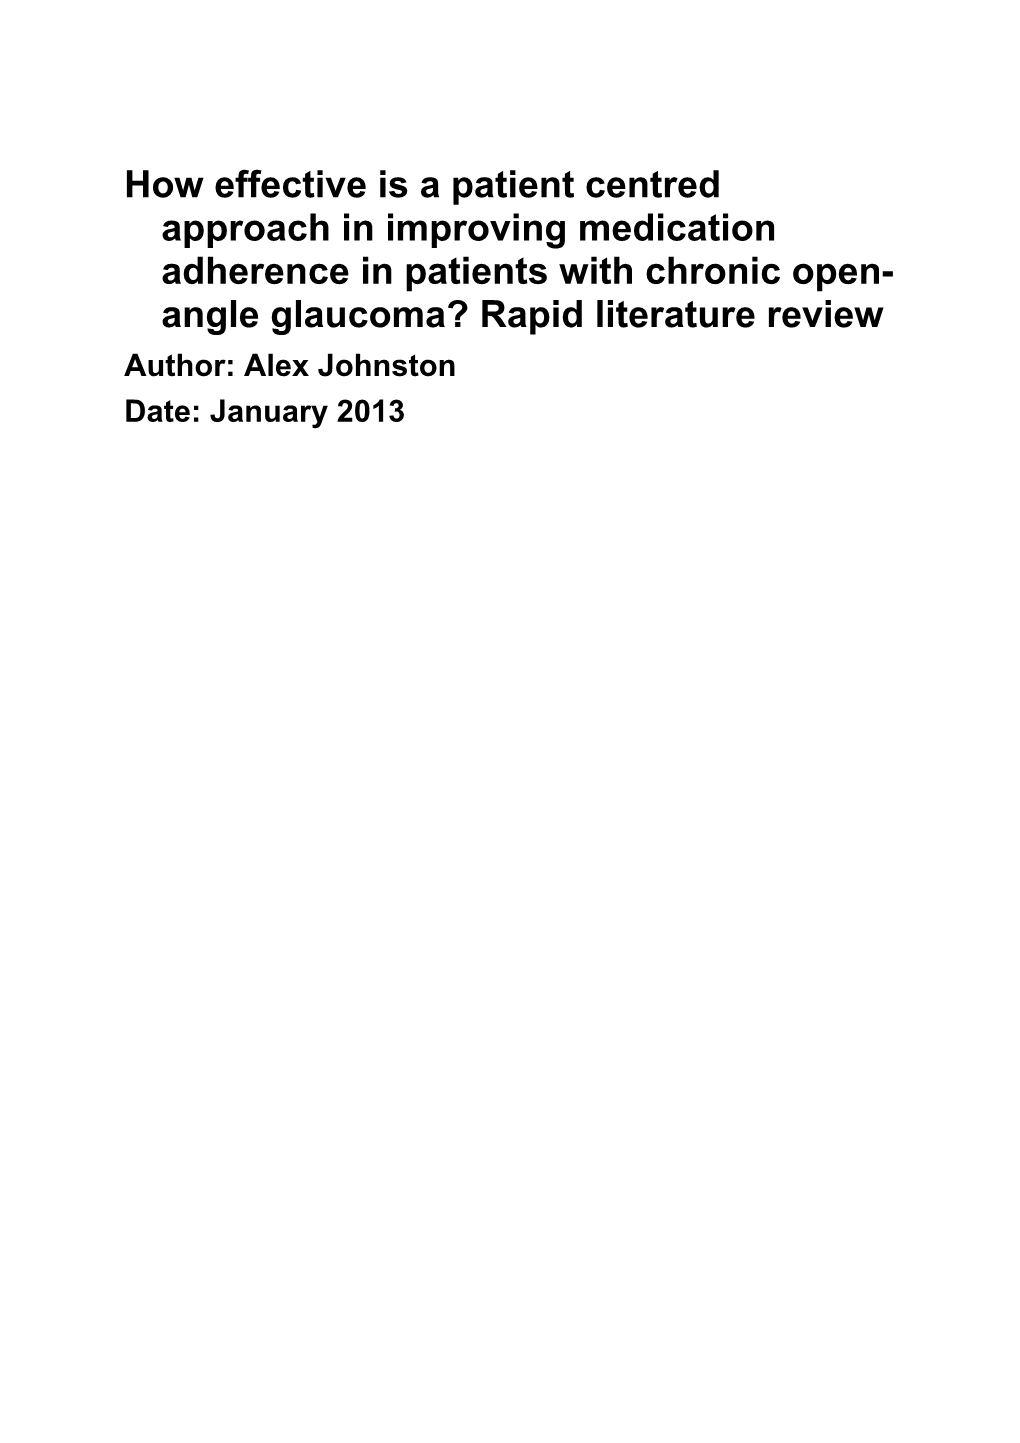 How Effective Is a Patient Centred Approach in Improving Medication Adherence in Patients